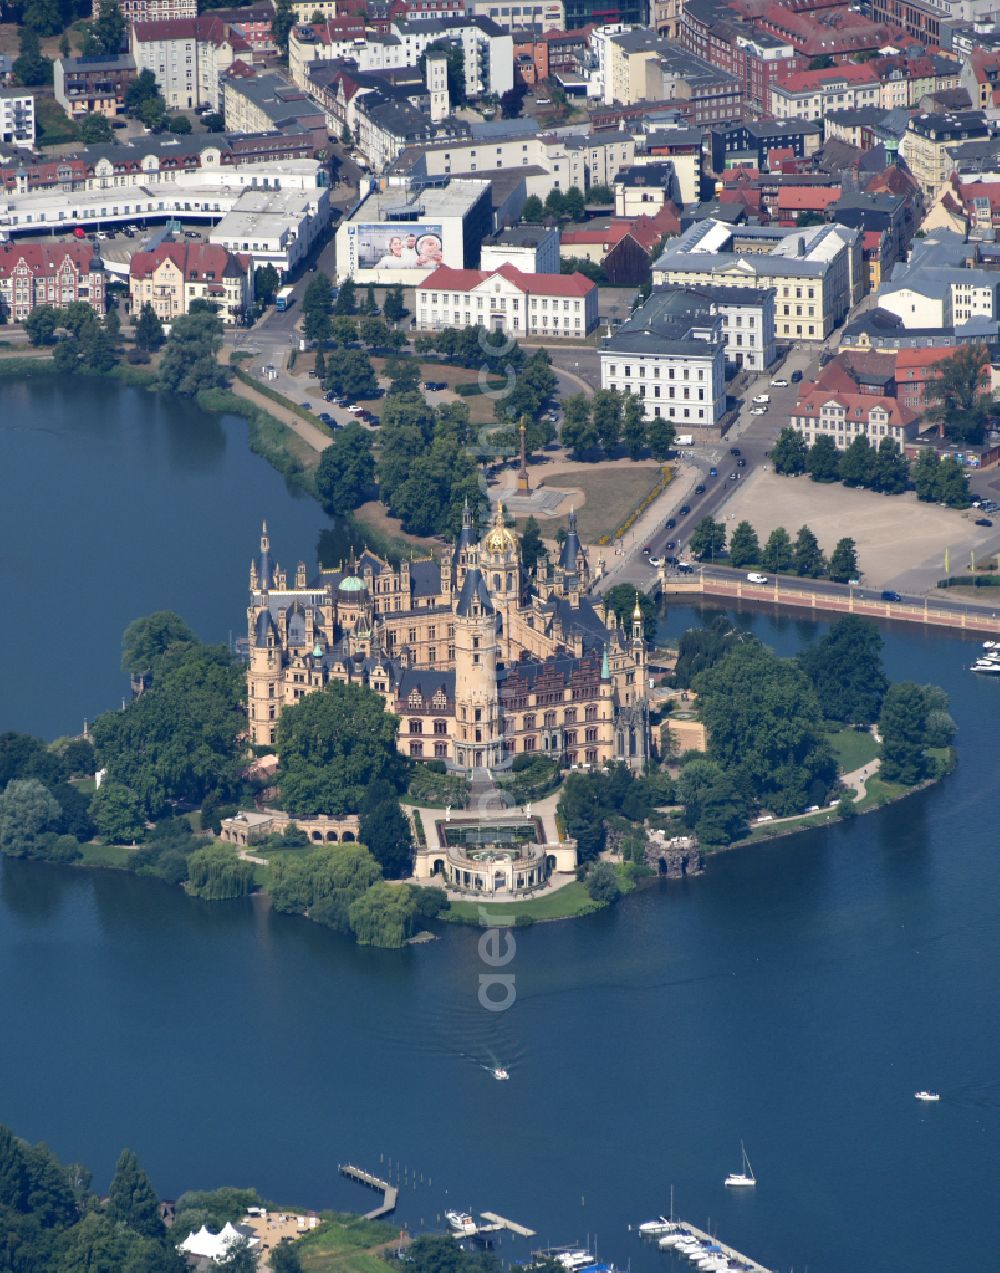 Schwerin from above - Schwerin Castle in the state capital of Mecklenburg-Western Pomerania